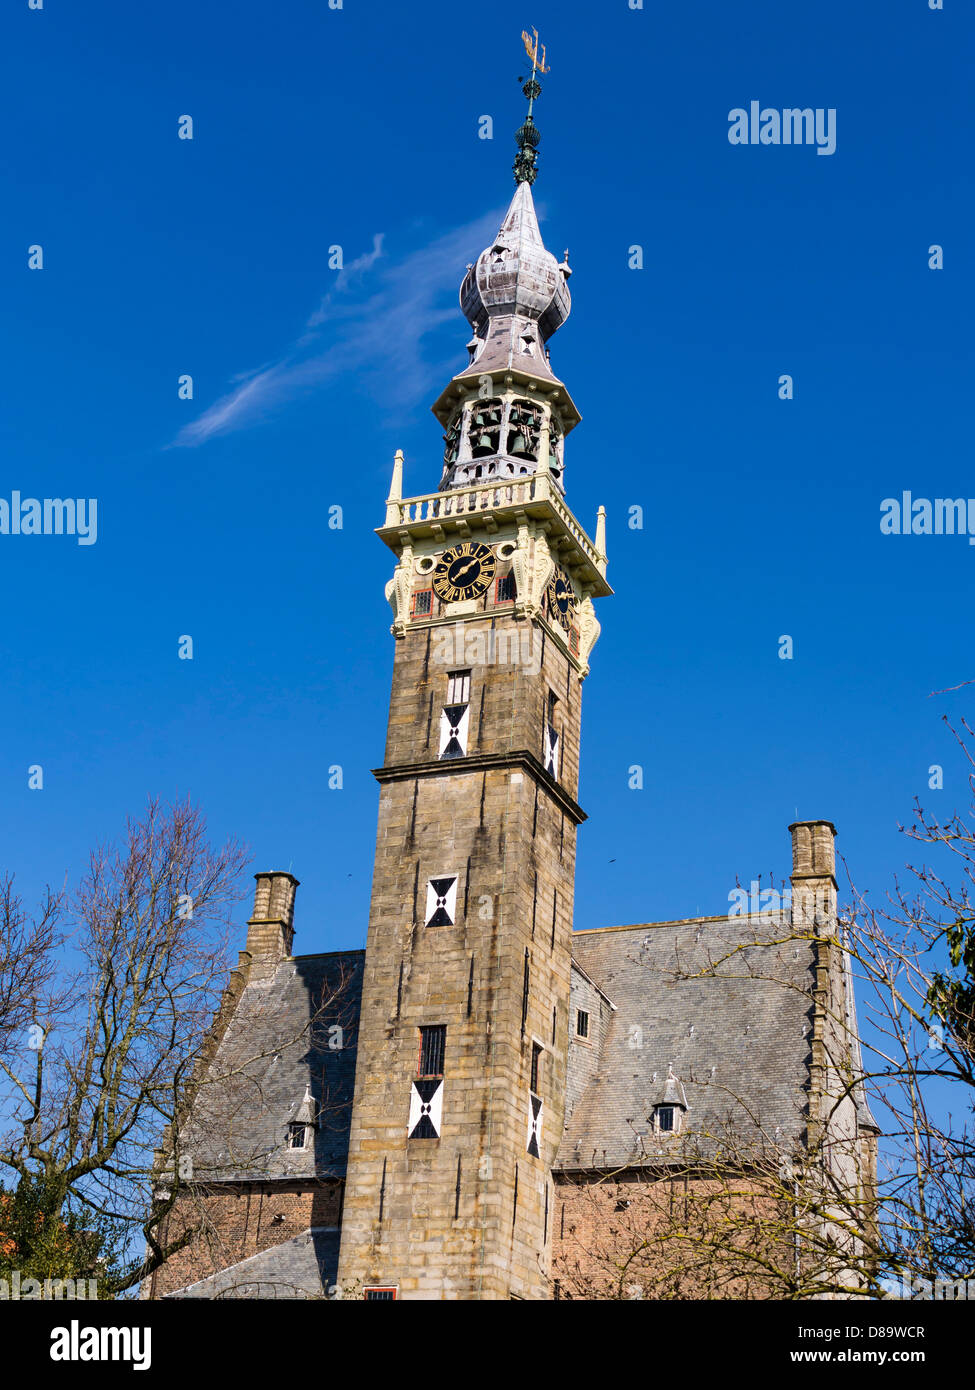 The tower of the old townhall at Veere. Stock Photo